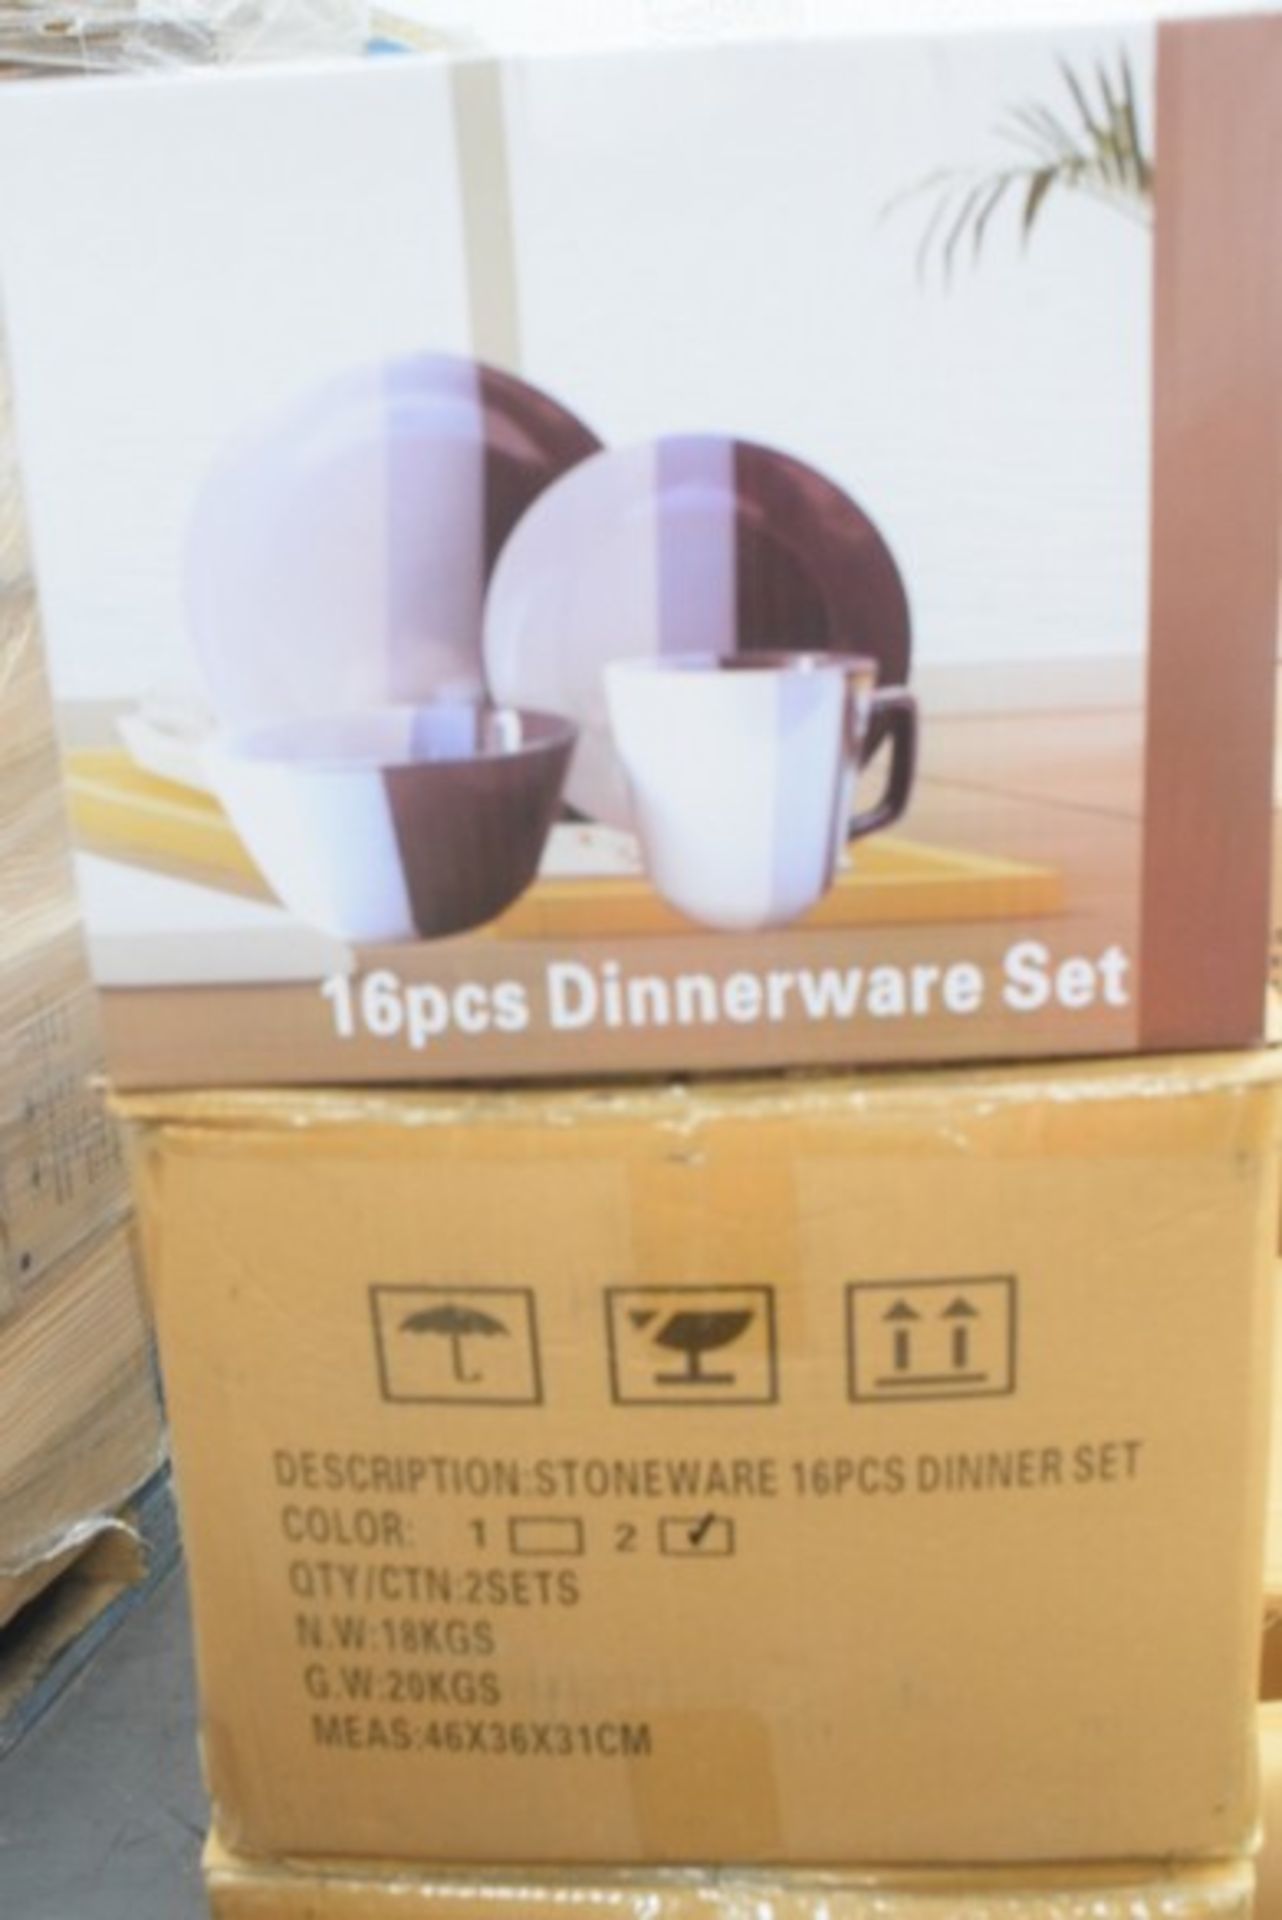 2 x BOXED BRAND NEW 16 PIECE DINNERWARE SETS RRP £30 EACH *PLEASE NOTE THAT THE BID PRICE IS